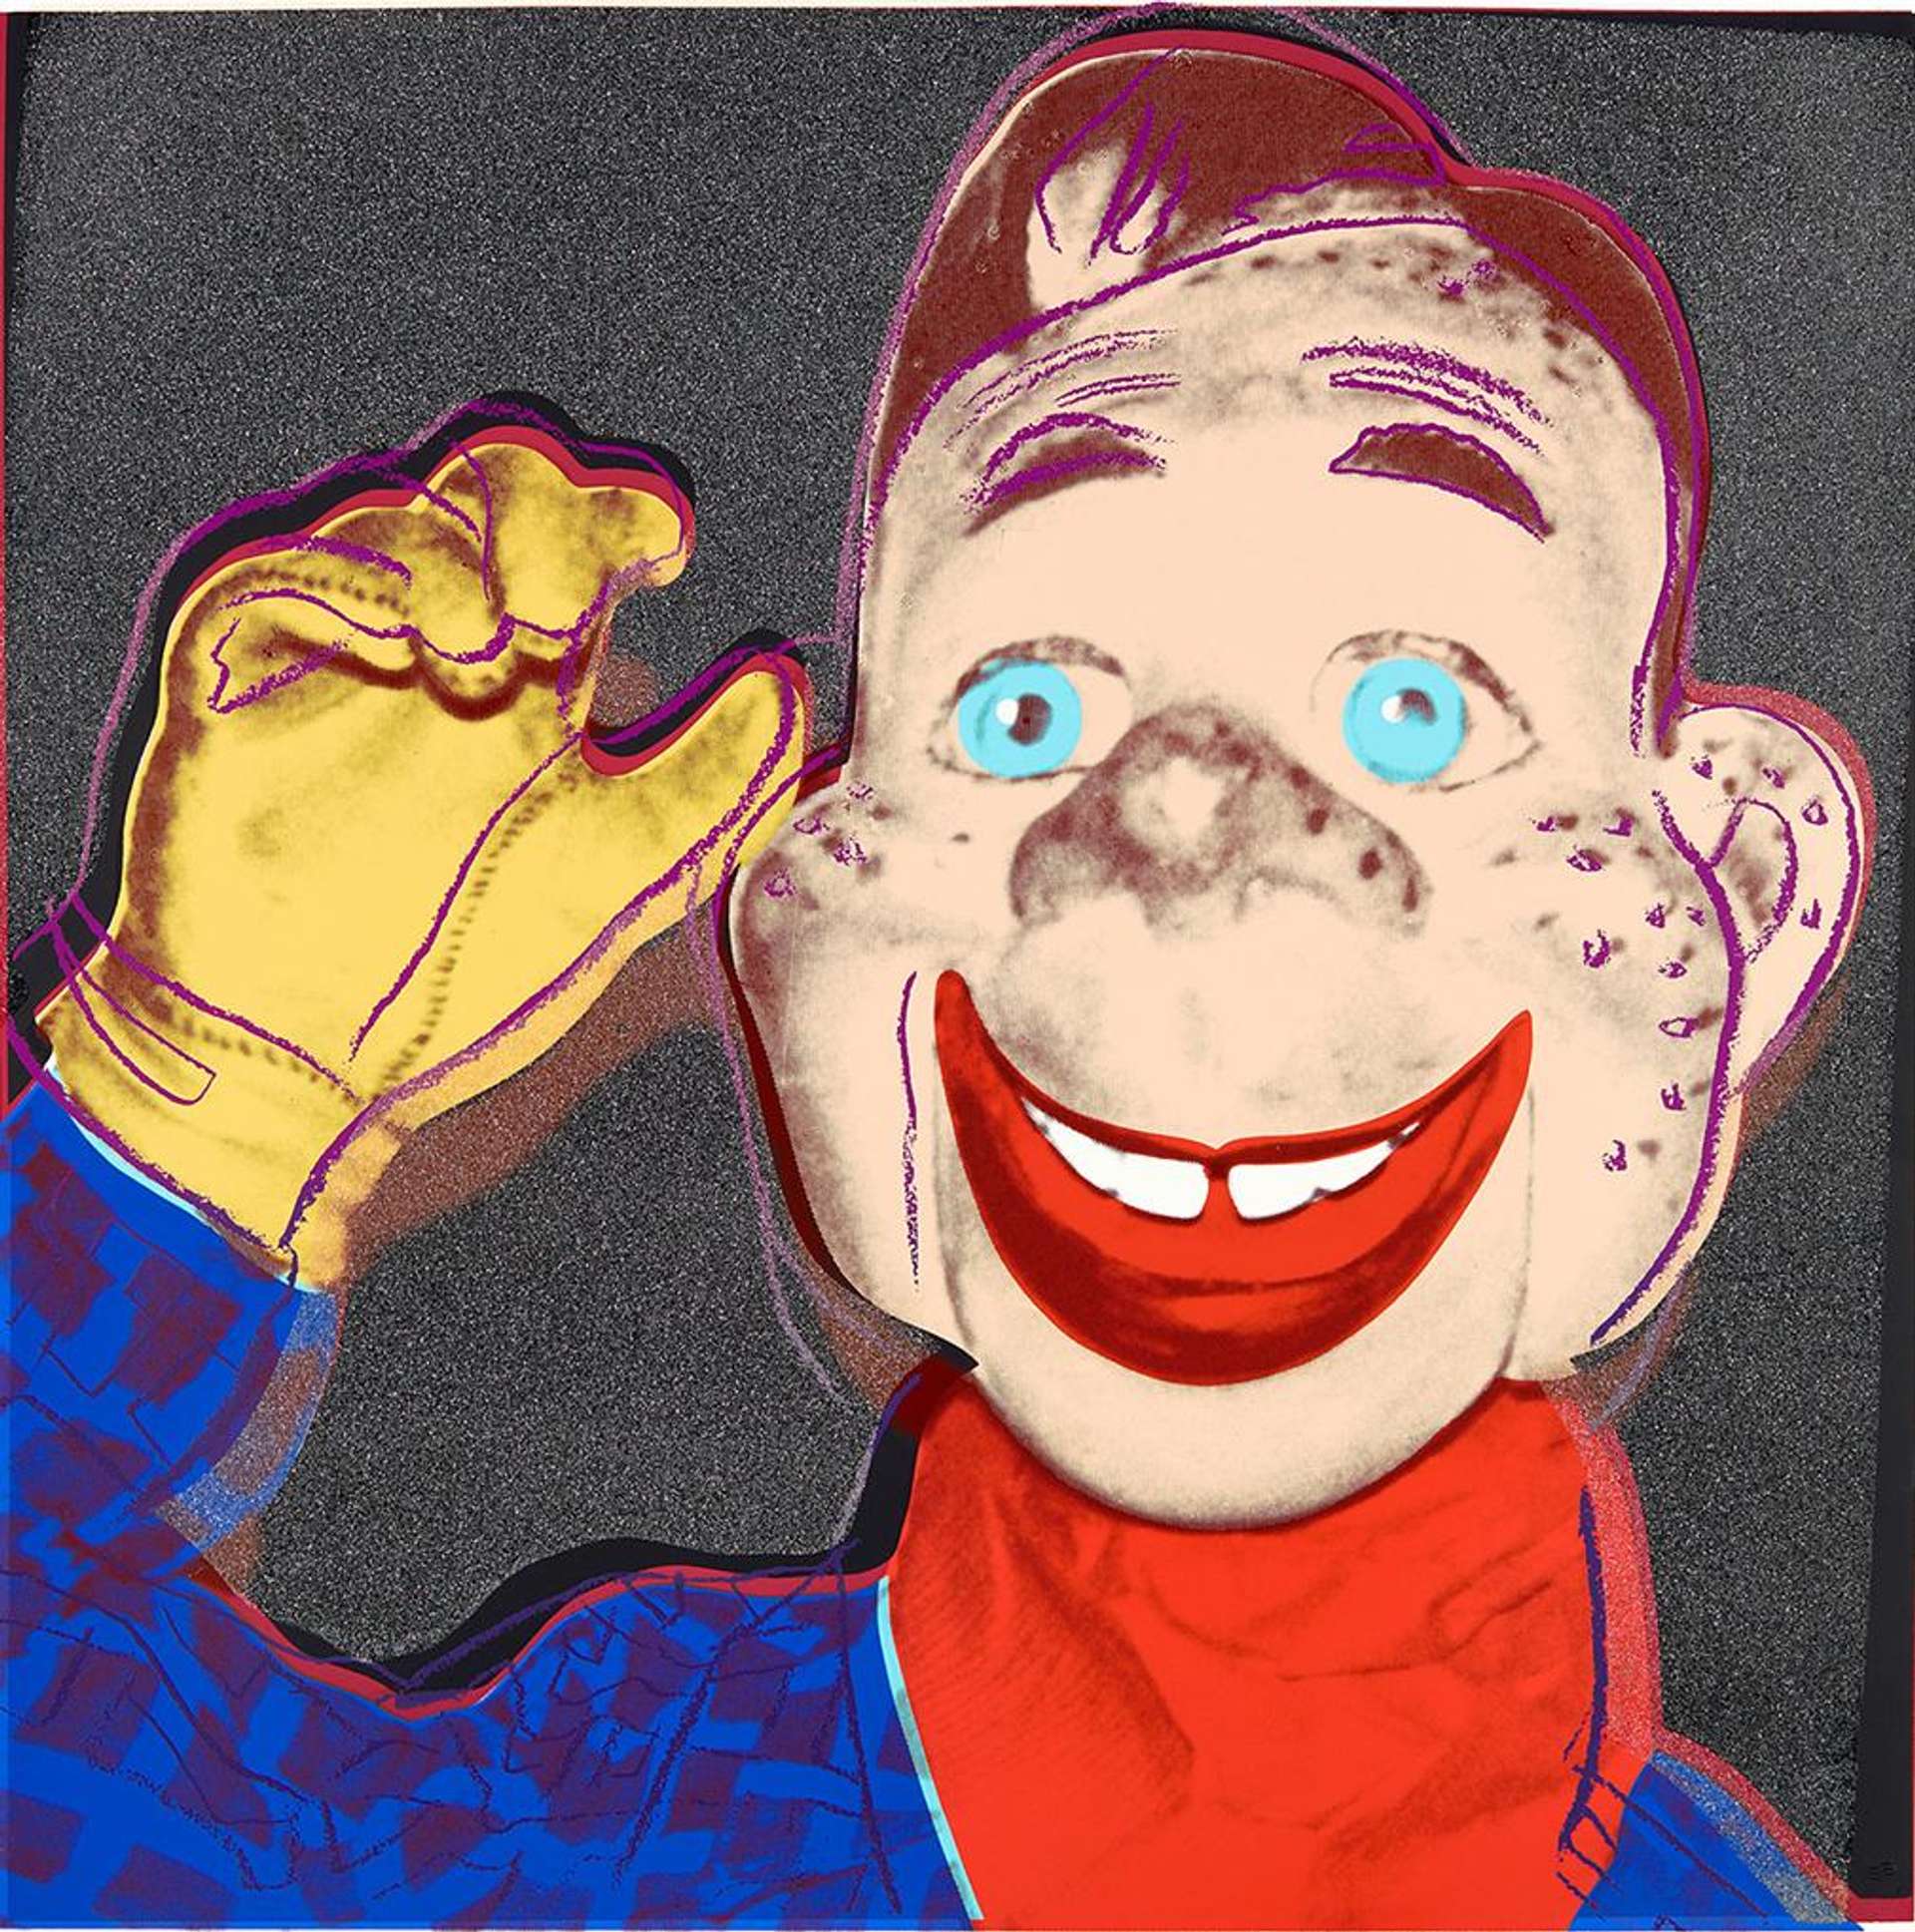 In this print, Warhol depicts the popular freckle-faced marionette Howdy Doody from the children’s television show of the same name, aired from the 1940s through to the 1960s. It shows the fictional character in vivid primary colours set against a contrasting dark backdrop, providing the figure with an illuminous glow. Warhol also uses his trademark crayon-like line drawing to contour the image, emphasising the graphic style.